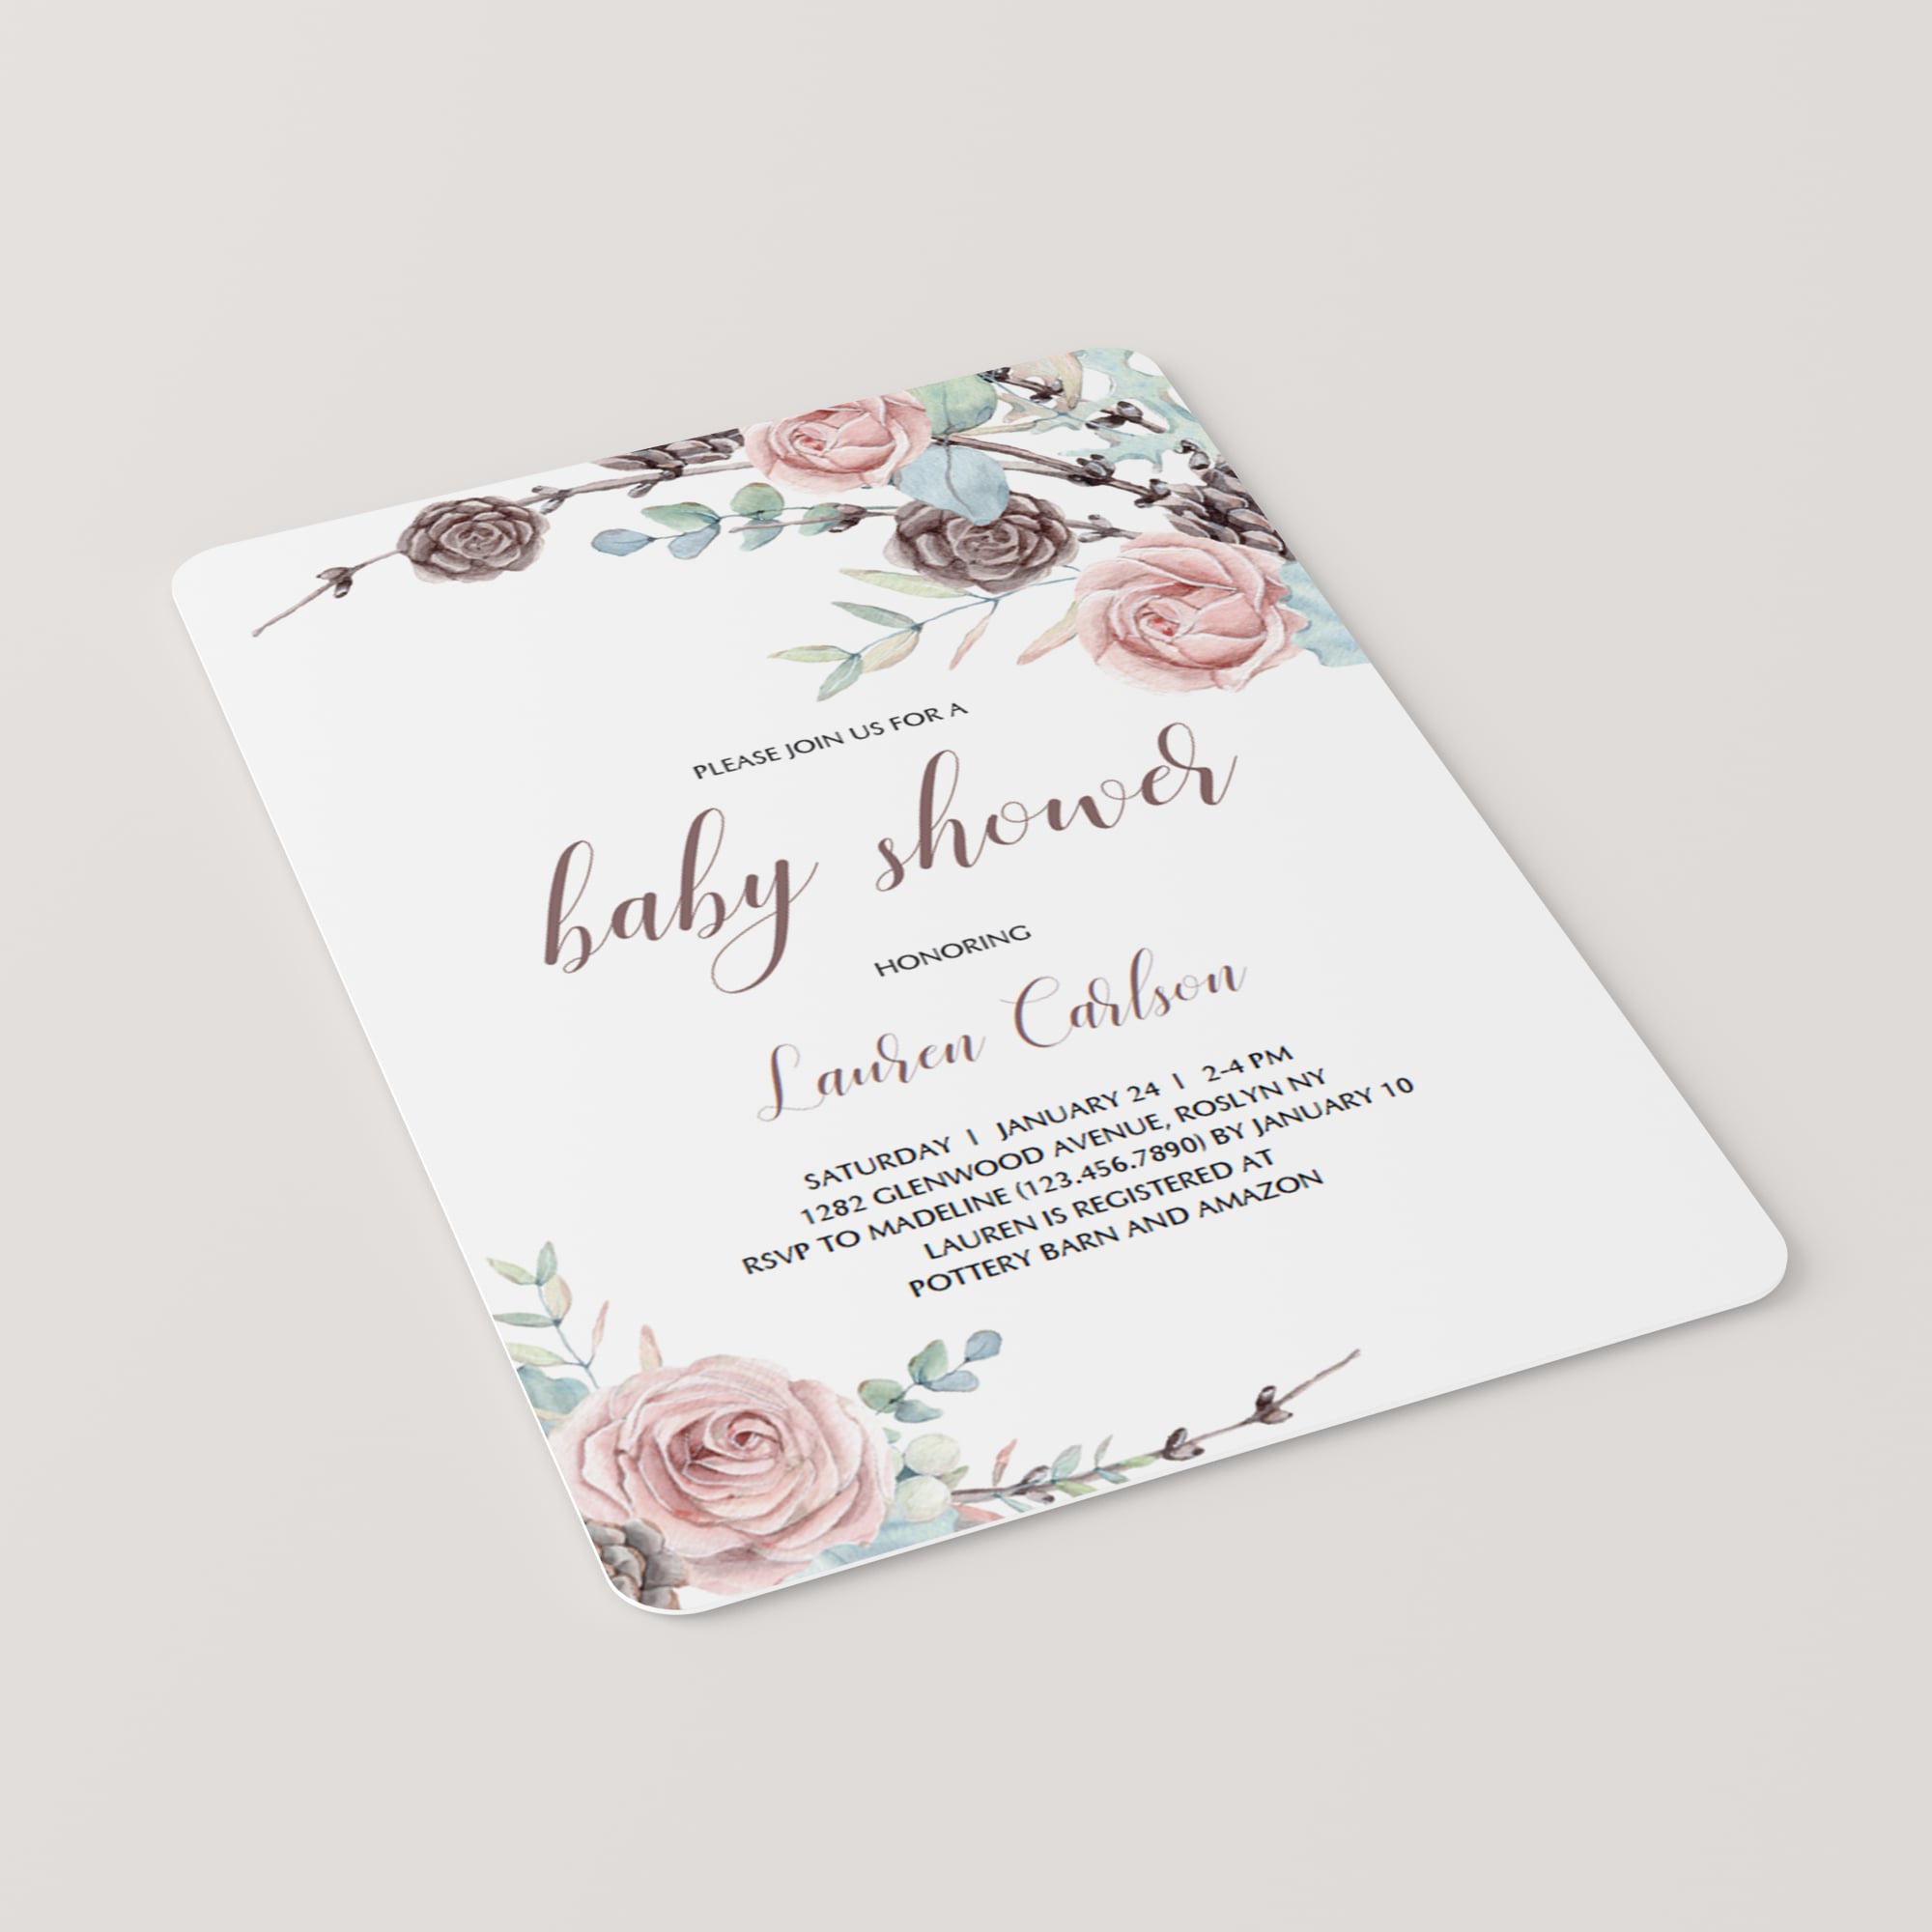 Baby shower evite template download by LittleSizzle